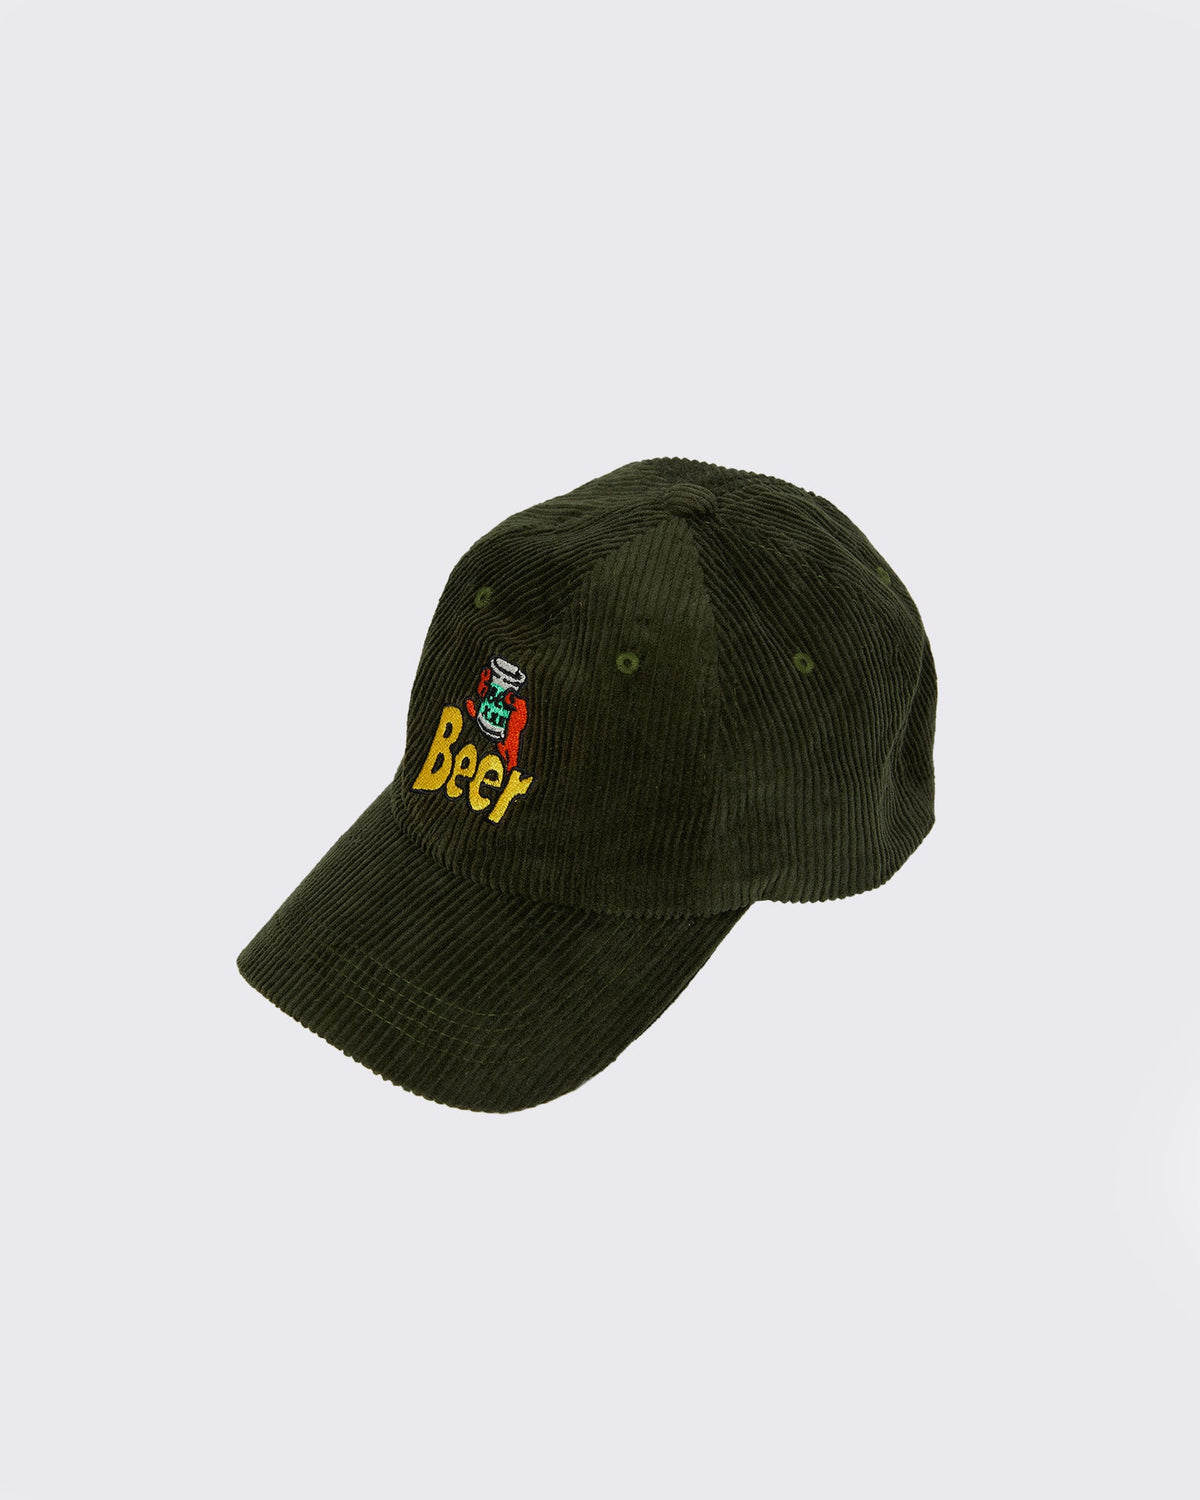 St. Goliath-Beer Cord Cap Olive-Edge Clothing